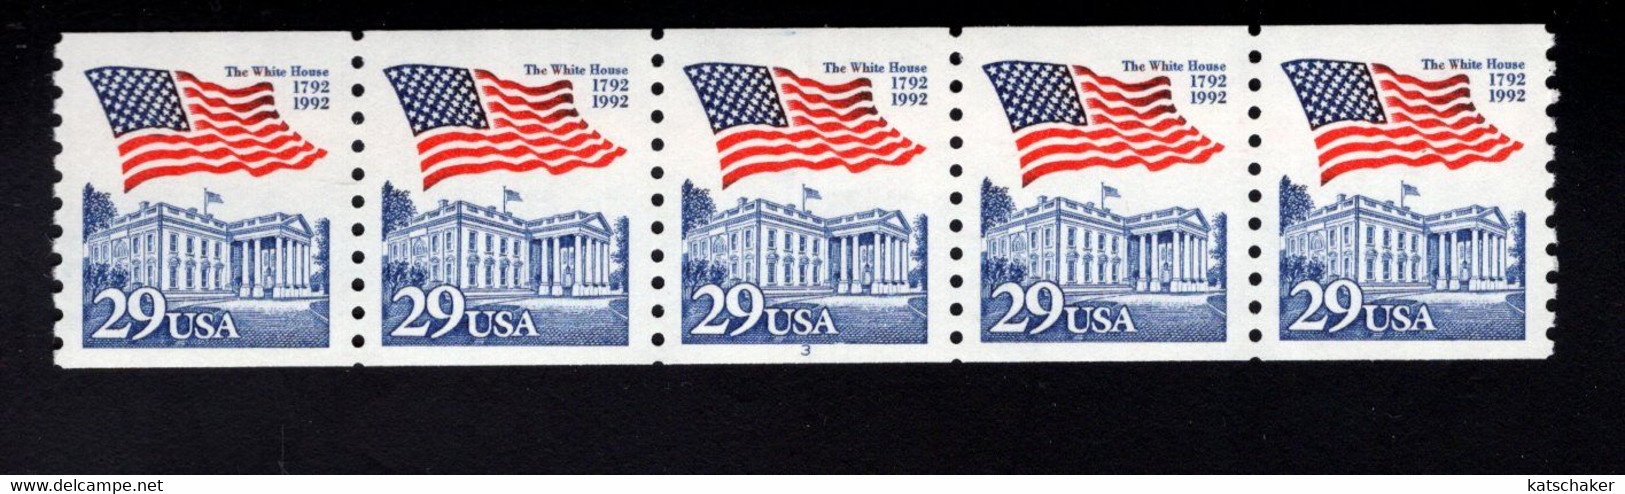 3609219166 1992  (XX) SCOTT 2609 PCN 3 POSTFRIS MINT NEVER HINGED - FLAG OVER WHITE HOUSE - Coils (Plate Numbers)